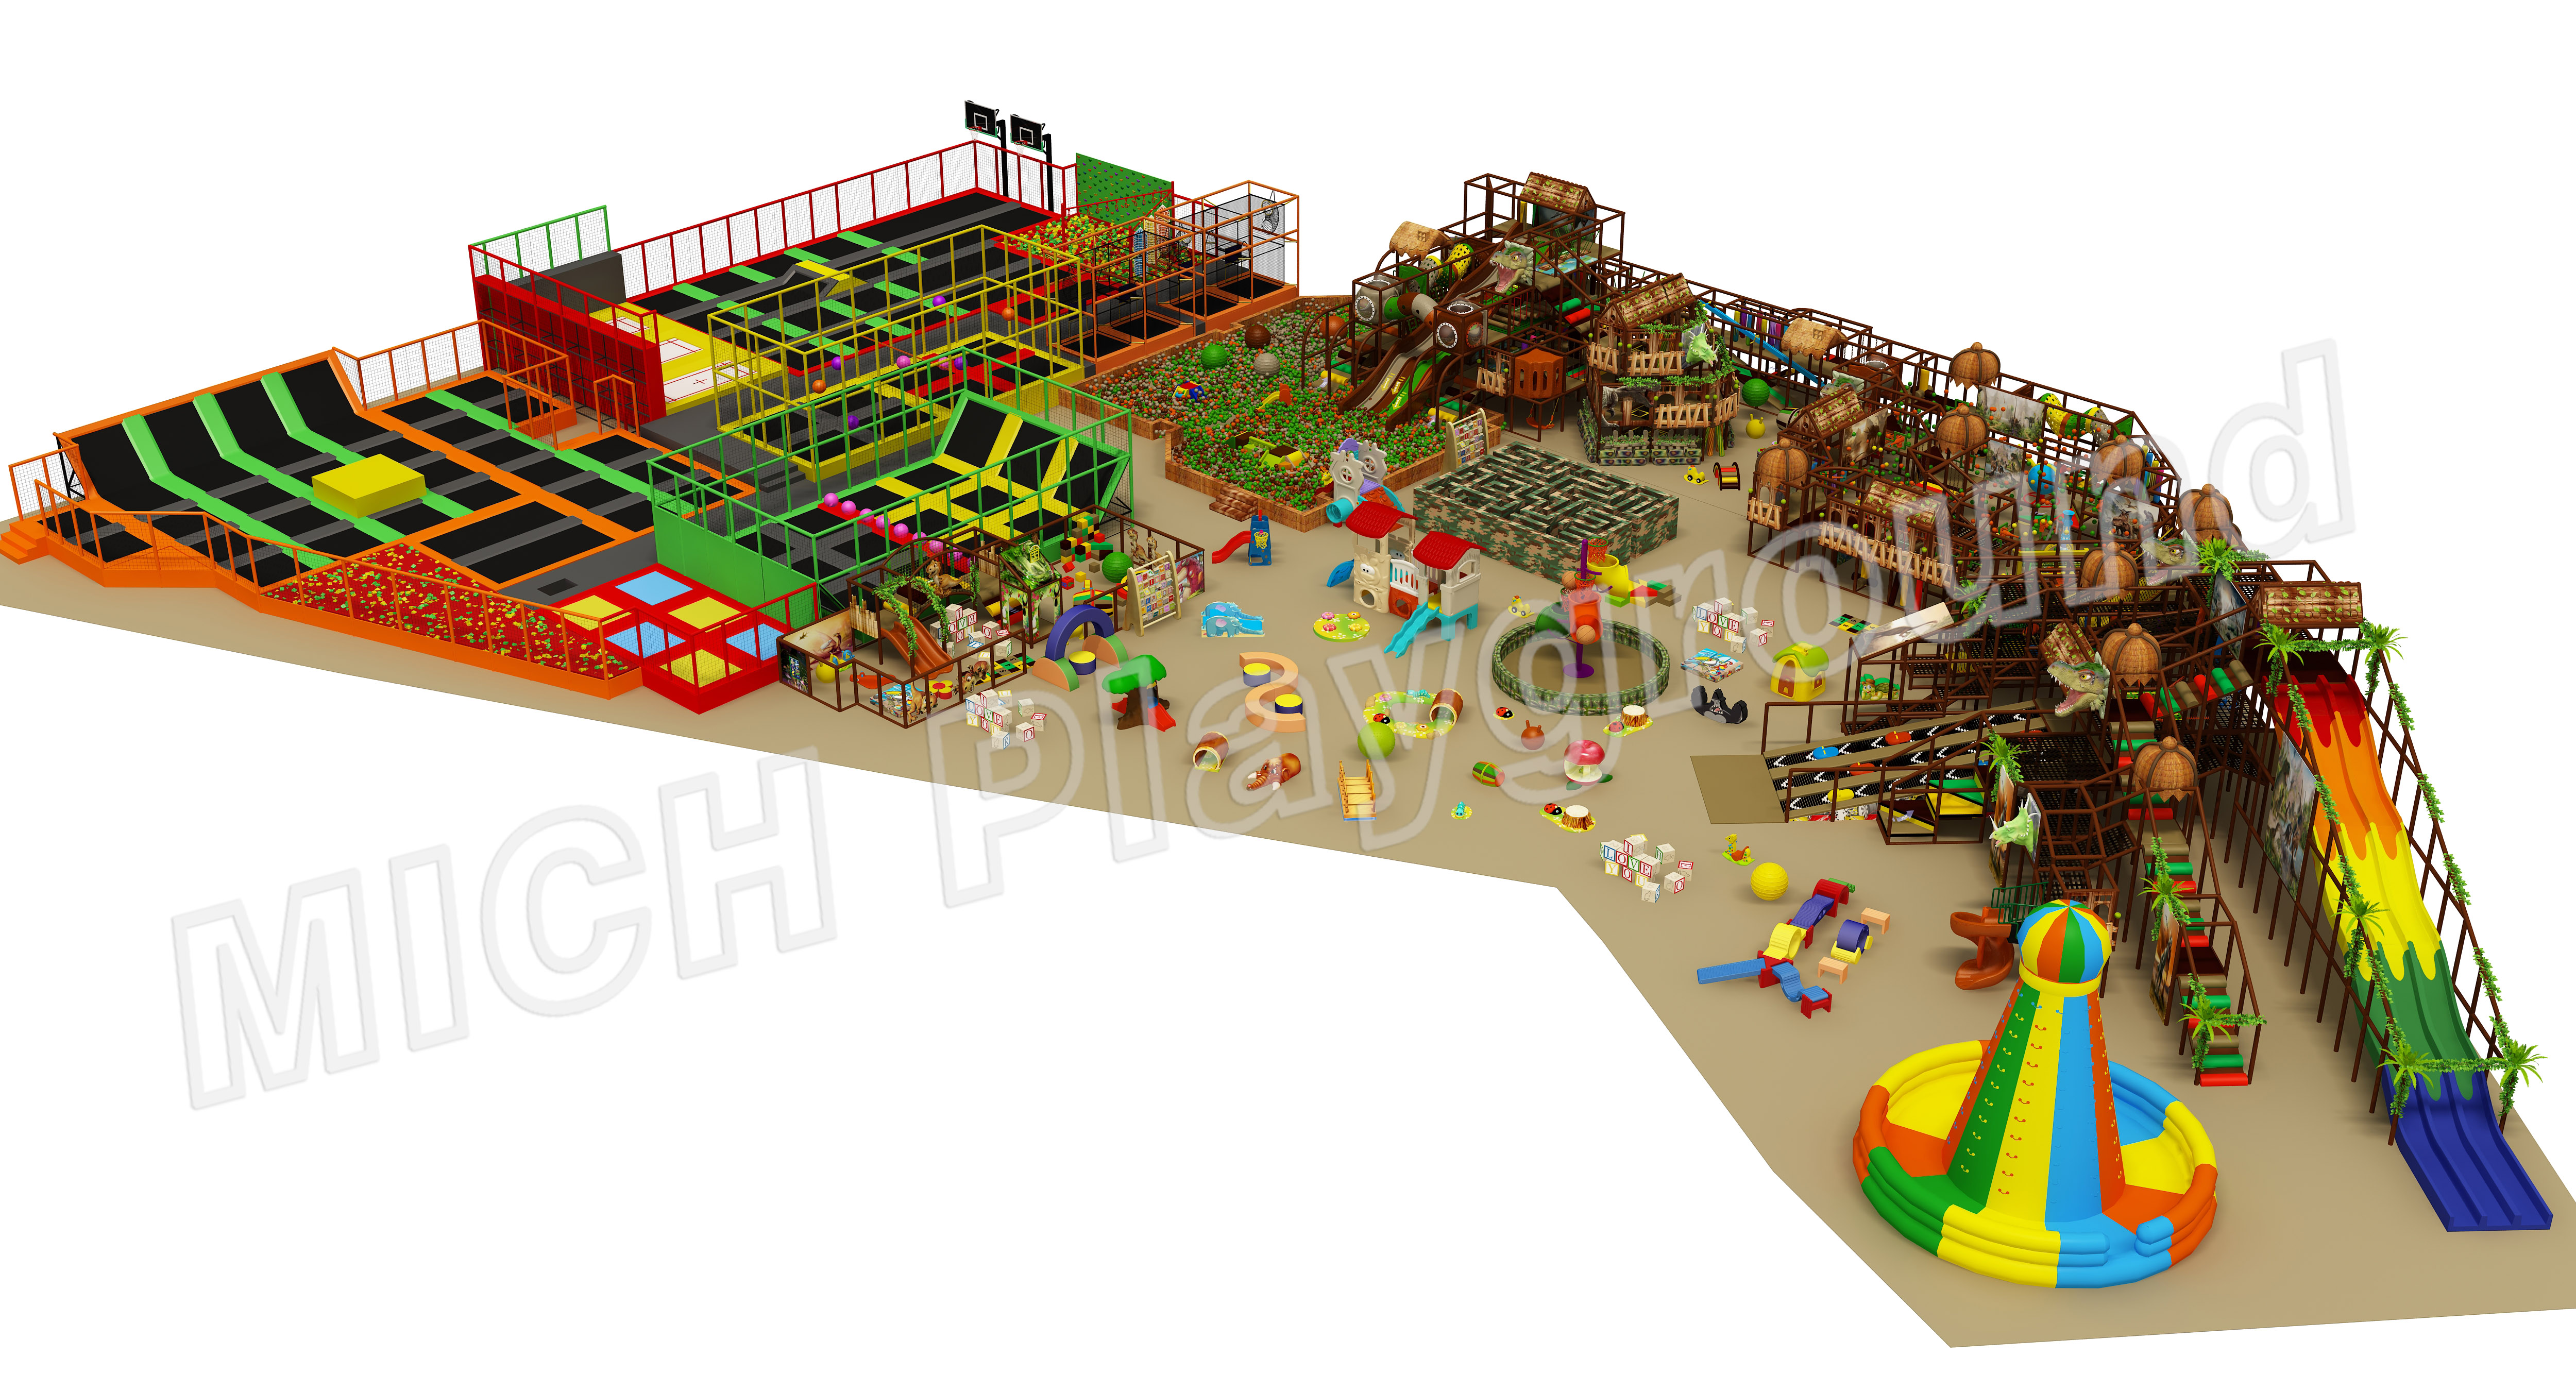 4000sqm Large Commercial Indoor Playground